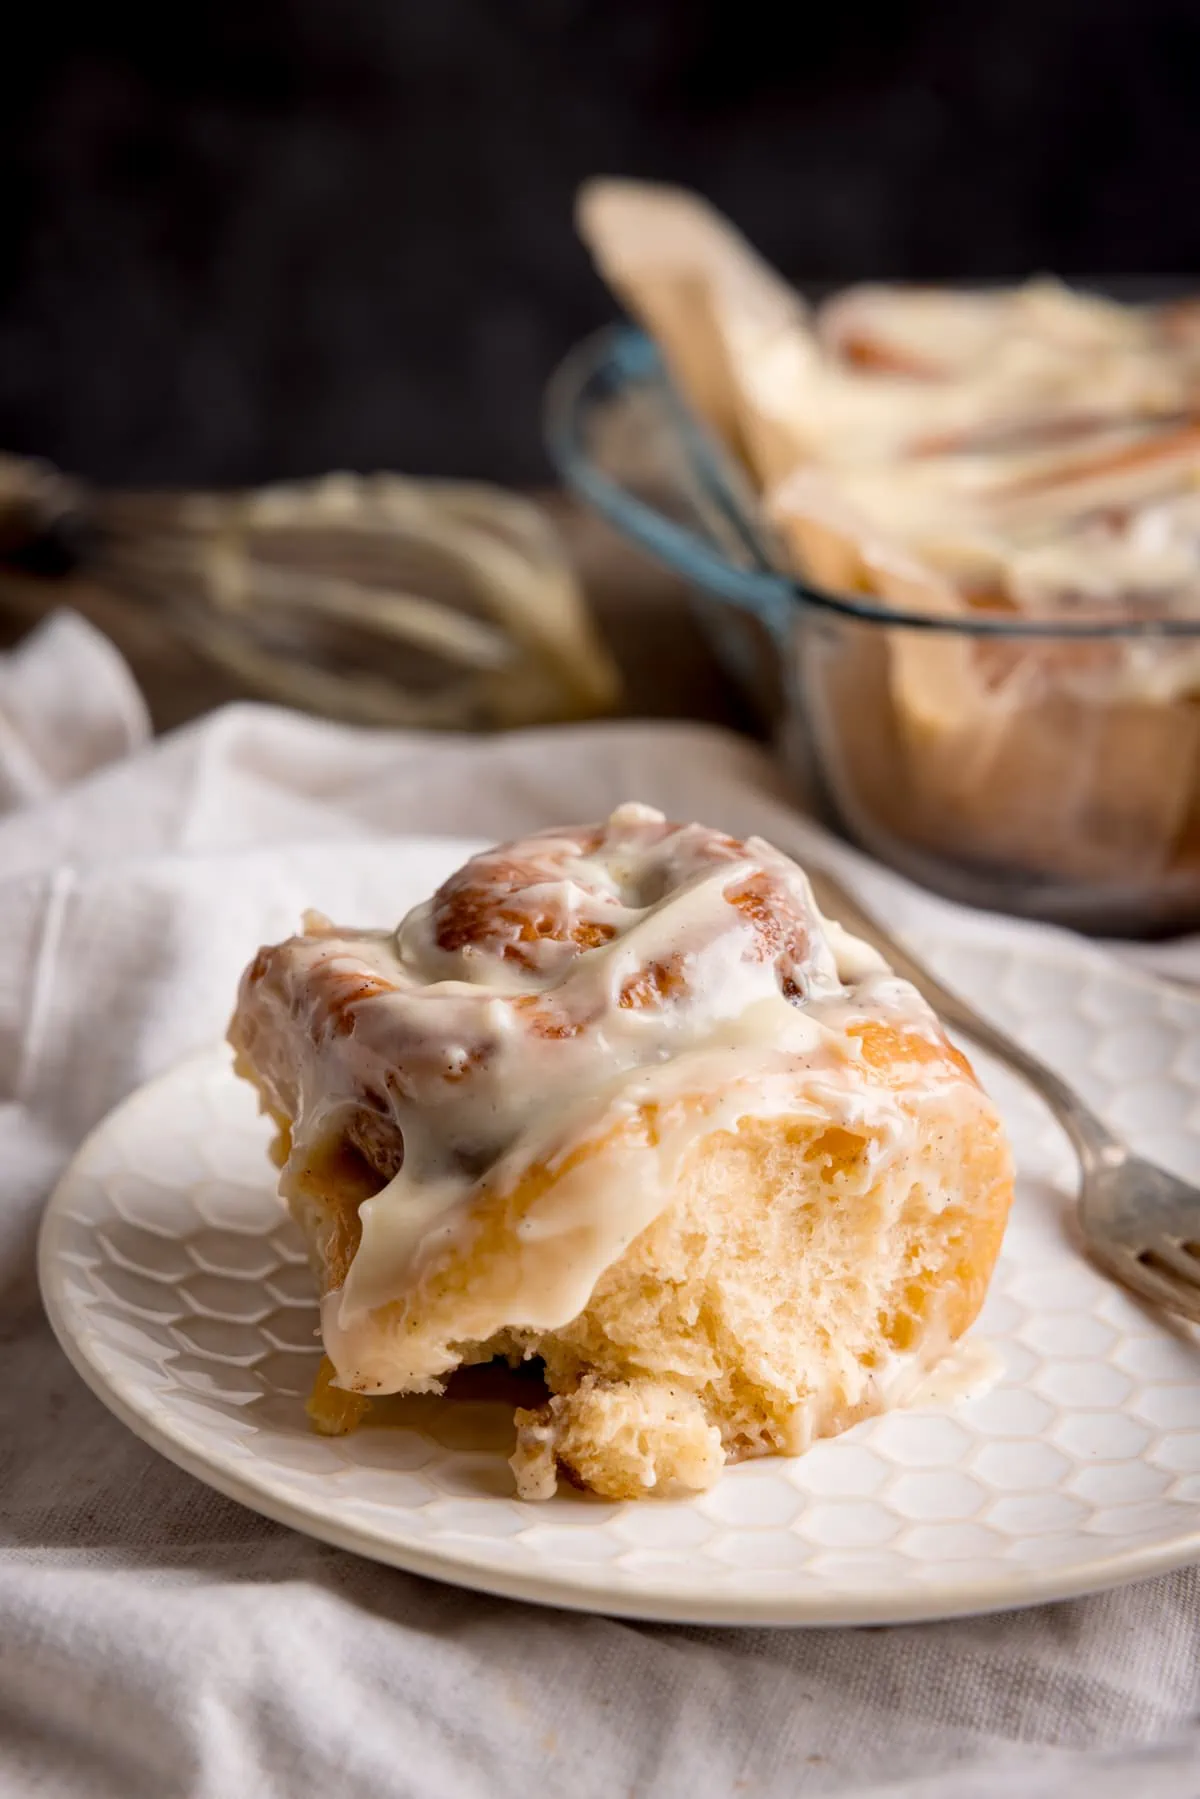 A single frosted cinnamon roll on a white plate with a small fork next to it. The plate is on a beige napkin. In the background there is a glass dish filled with cinnamon rolls and a whisk with cream cheese frosting on it.